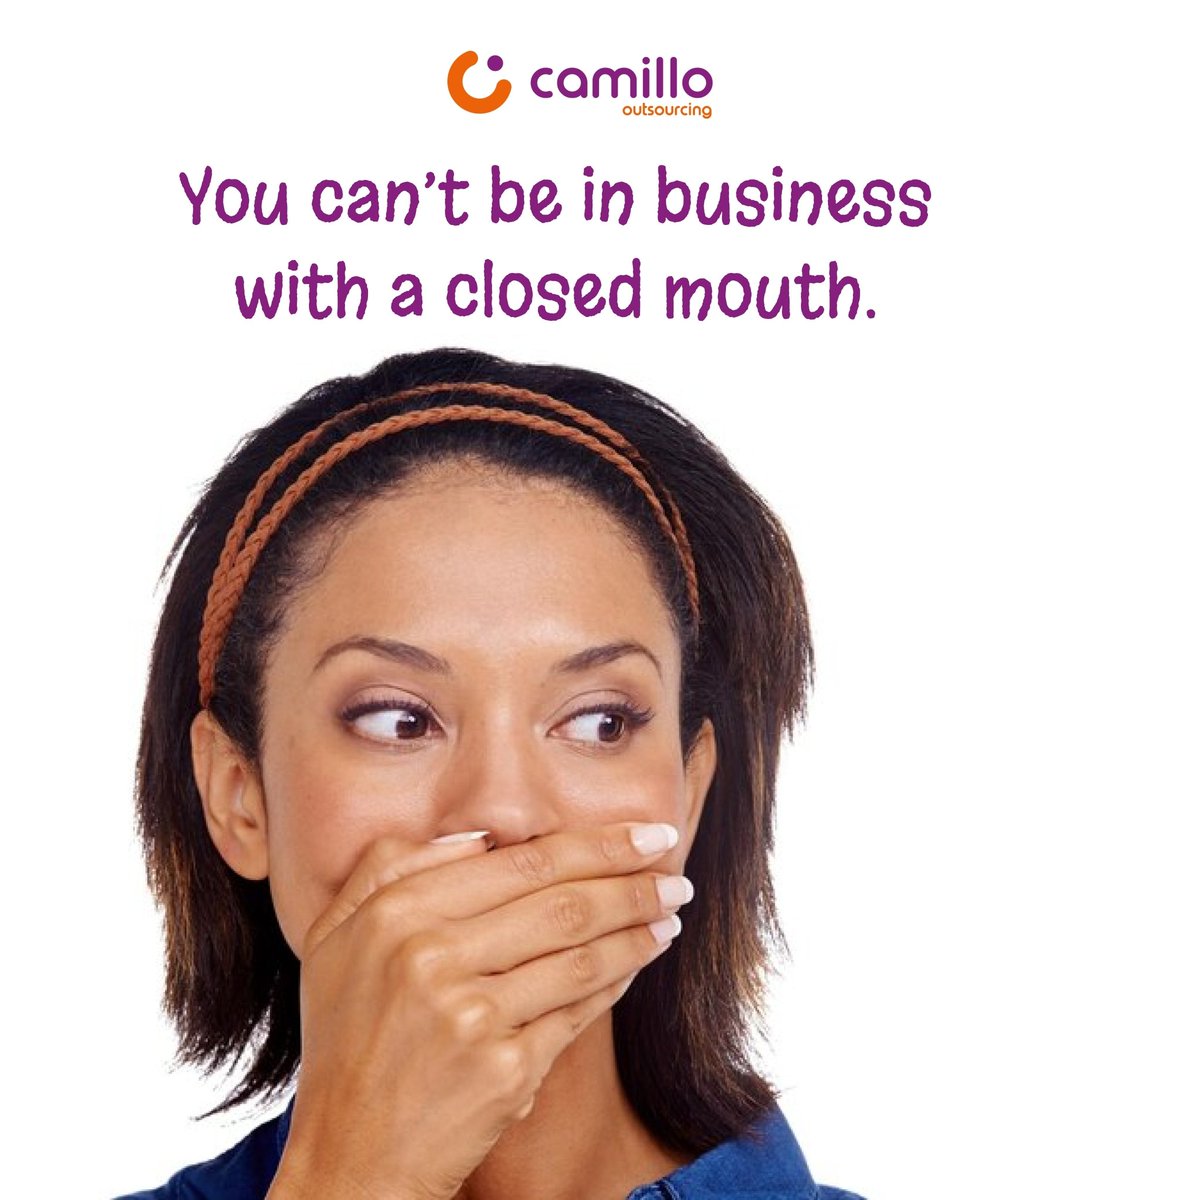 Speak about your business
Wear you brand
Be visible.

You can't be in business with a closed mouth...

#camillo #outsource #business #bueinessowners #brand #brandvisibility #brandawearness